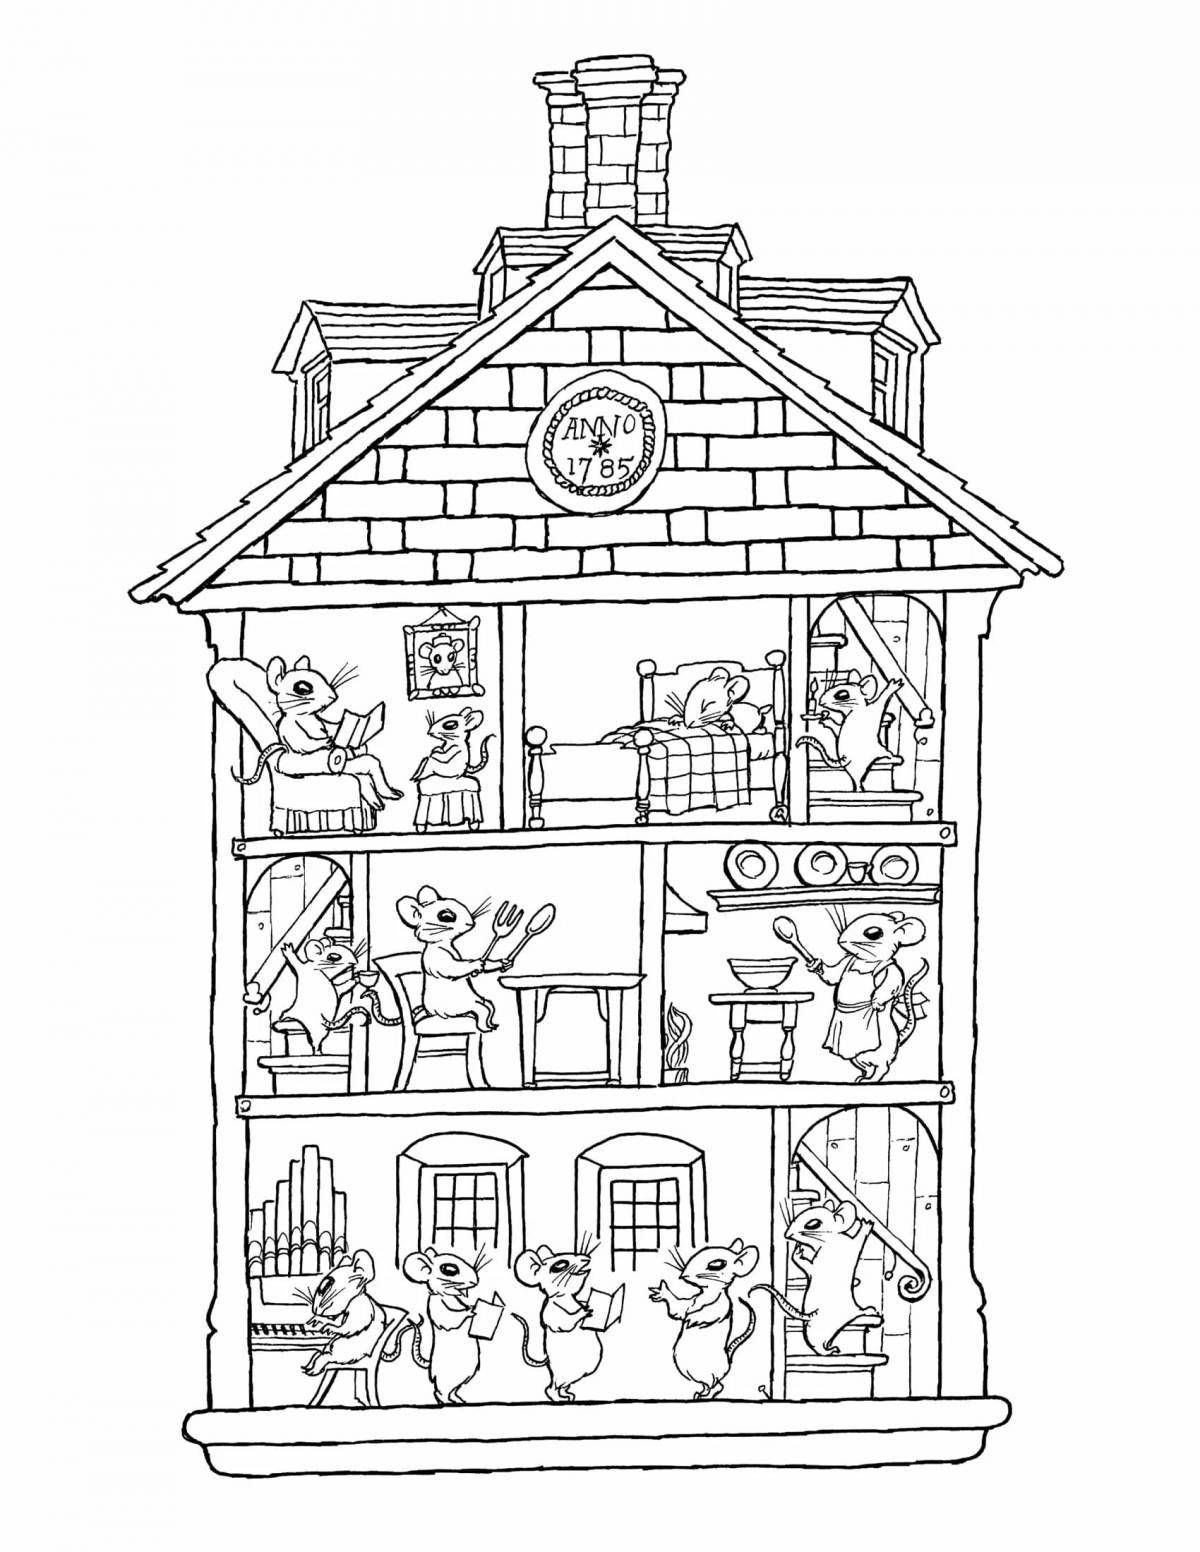 Crazy big house coloring pages for kids